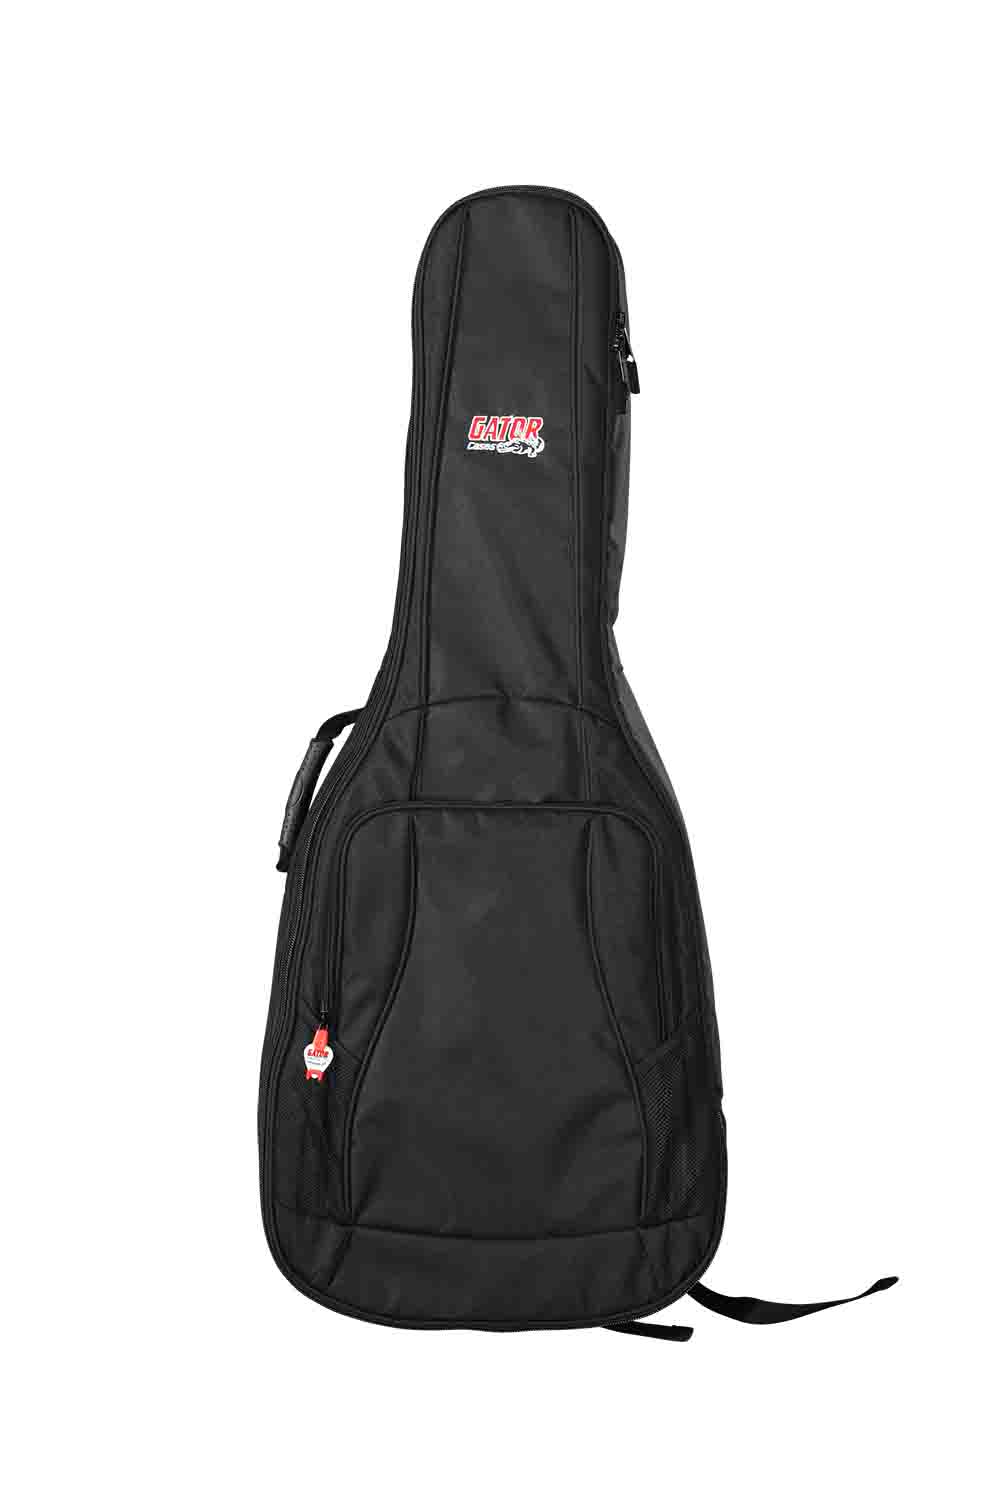 Gator Cases GB-4G-ACOUSTIC 4G Style Gig Bag for Acoustic Guitars with Adjustable Backpack Straps - Hollywood DJ